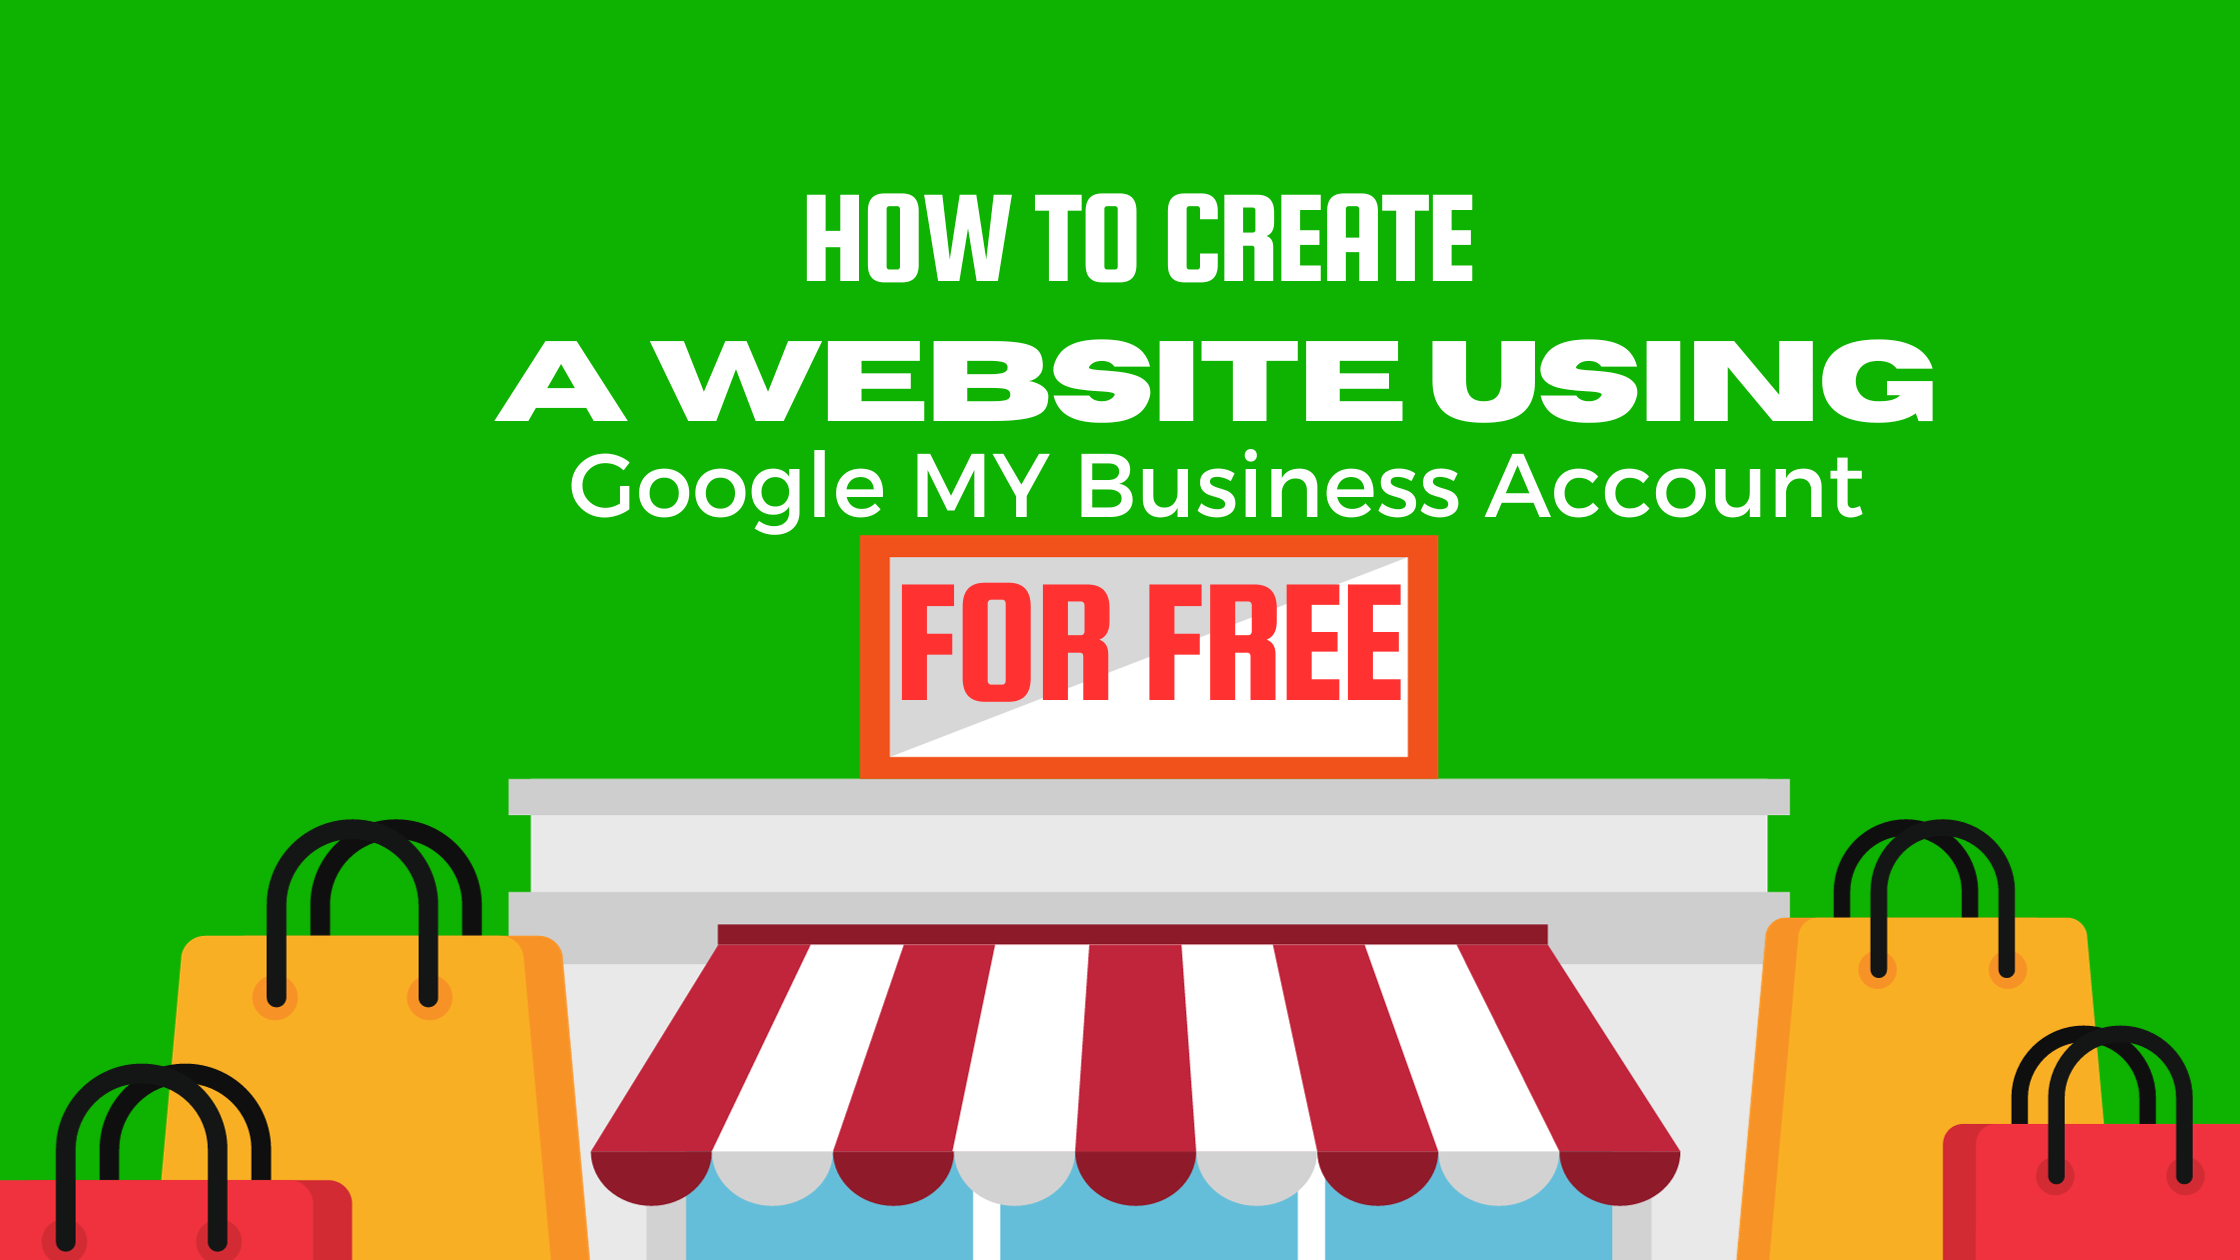 How to create simple website using Google my business